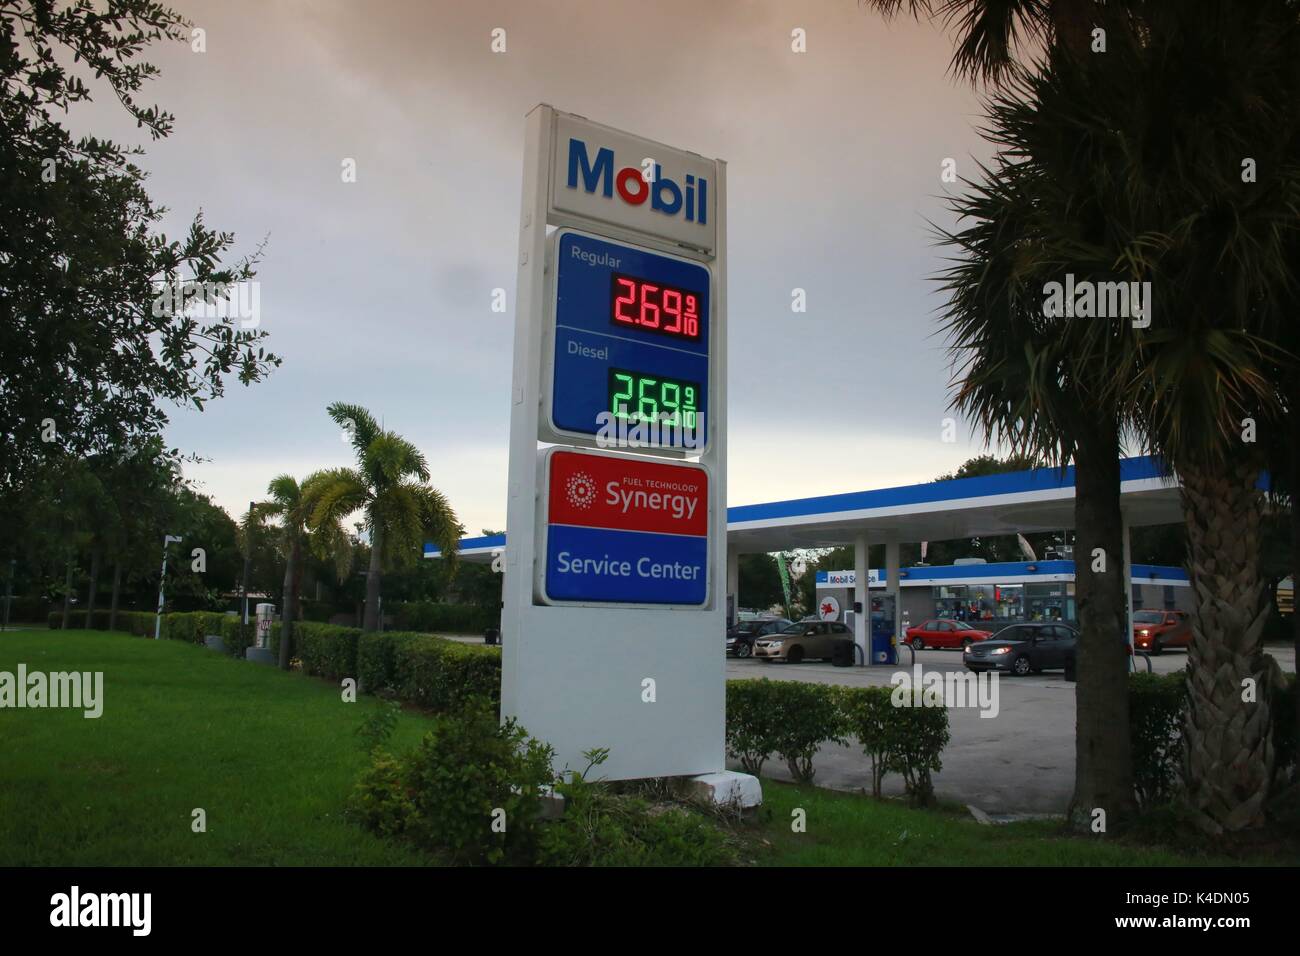 Mobil Gas Station Stock Photos & Mobil Gas Station Stock Images - Alamy